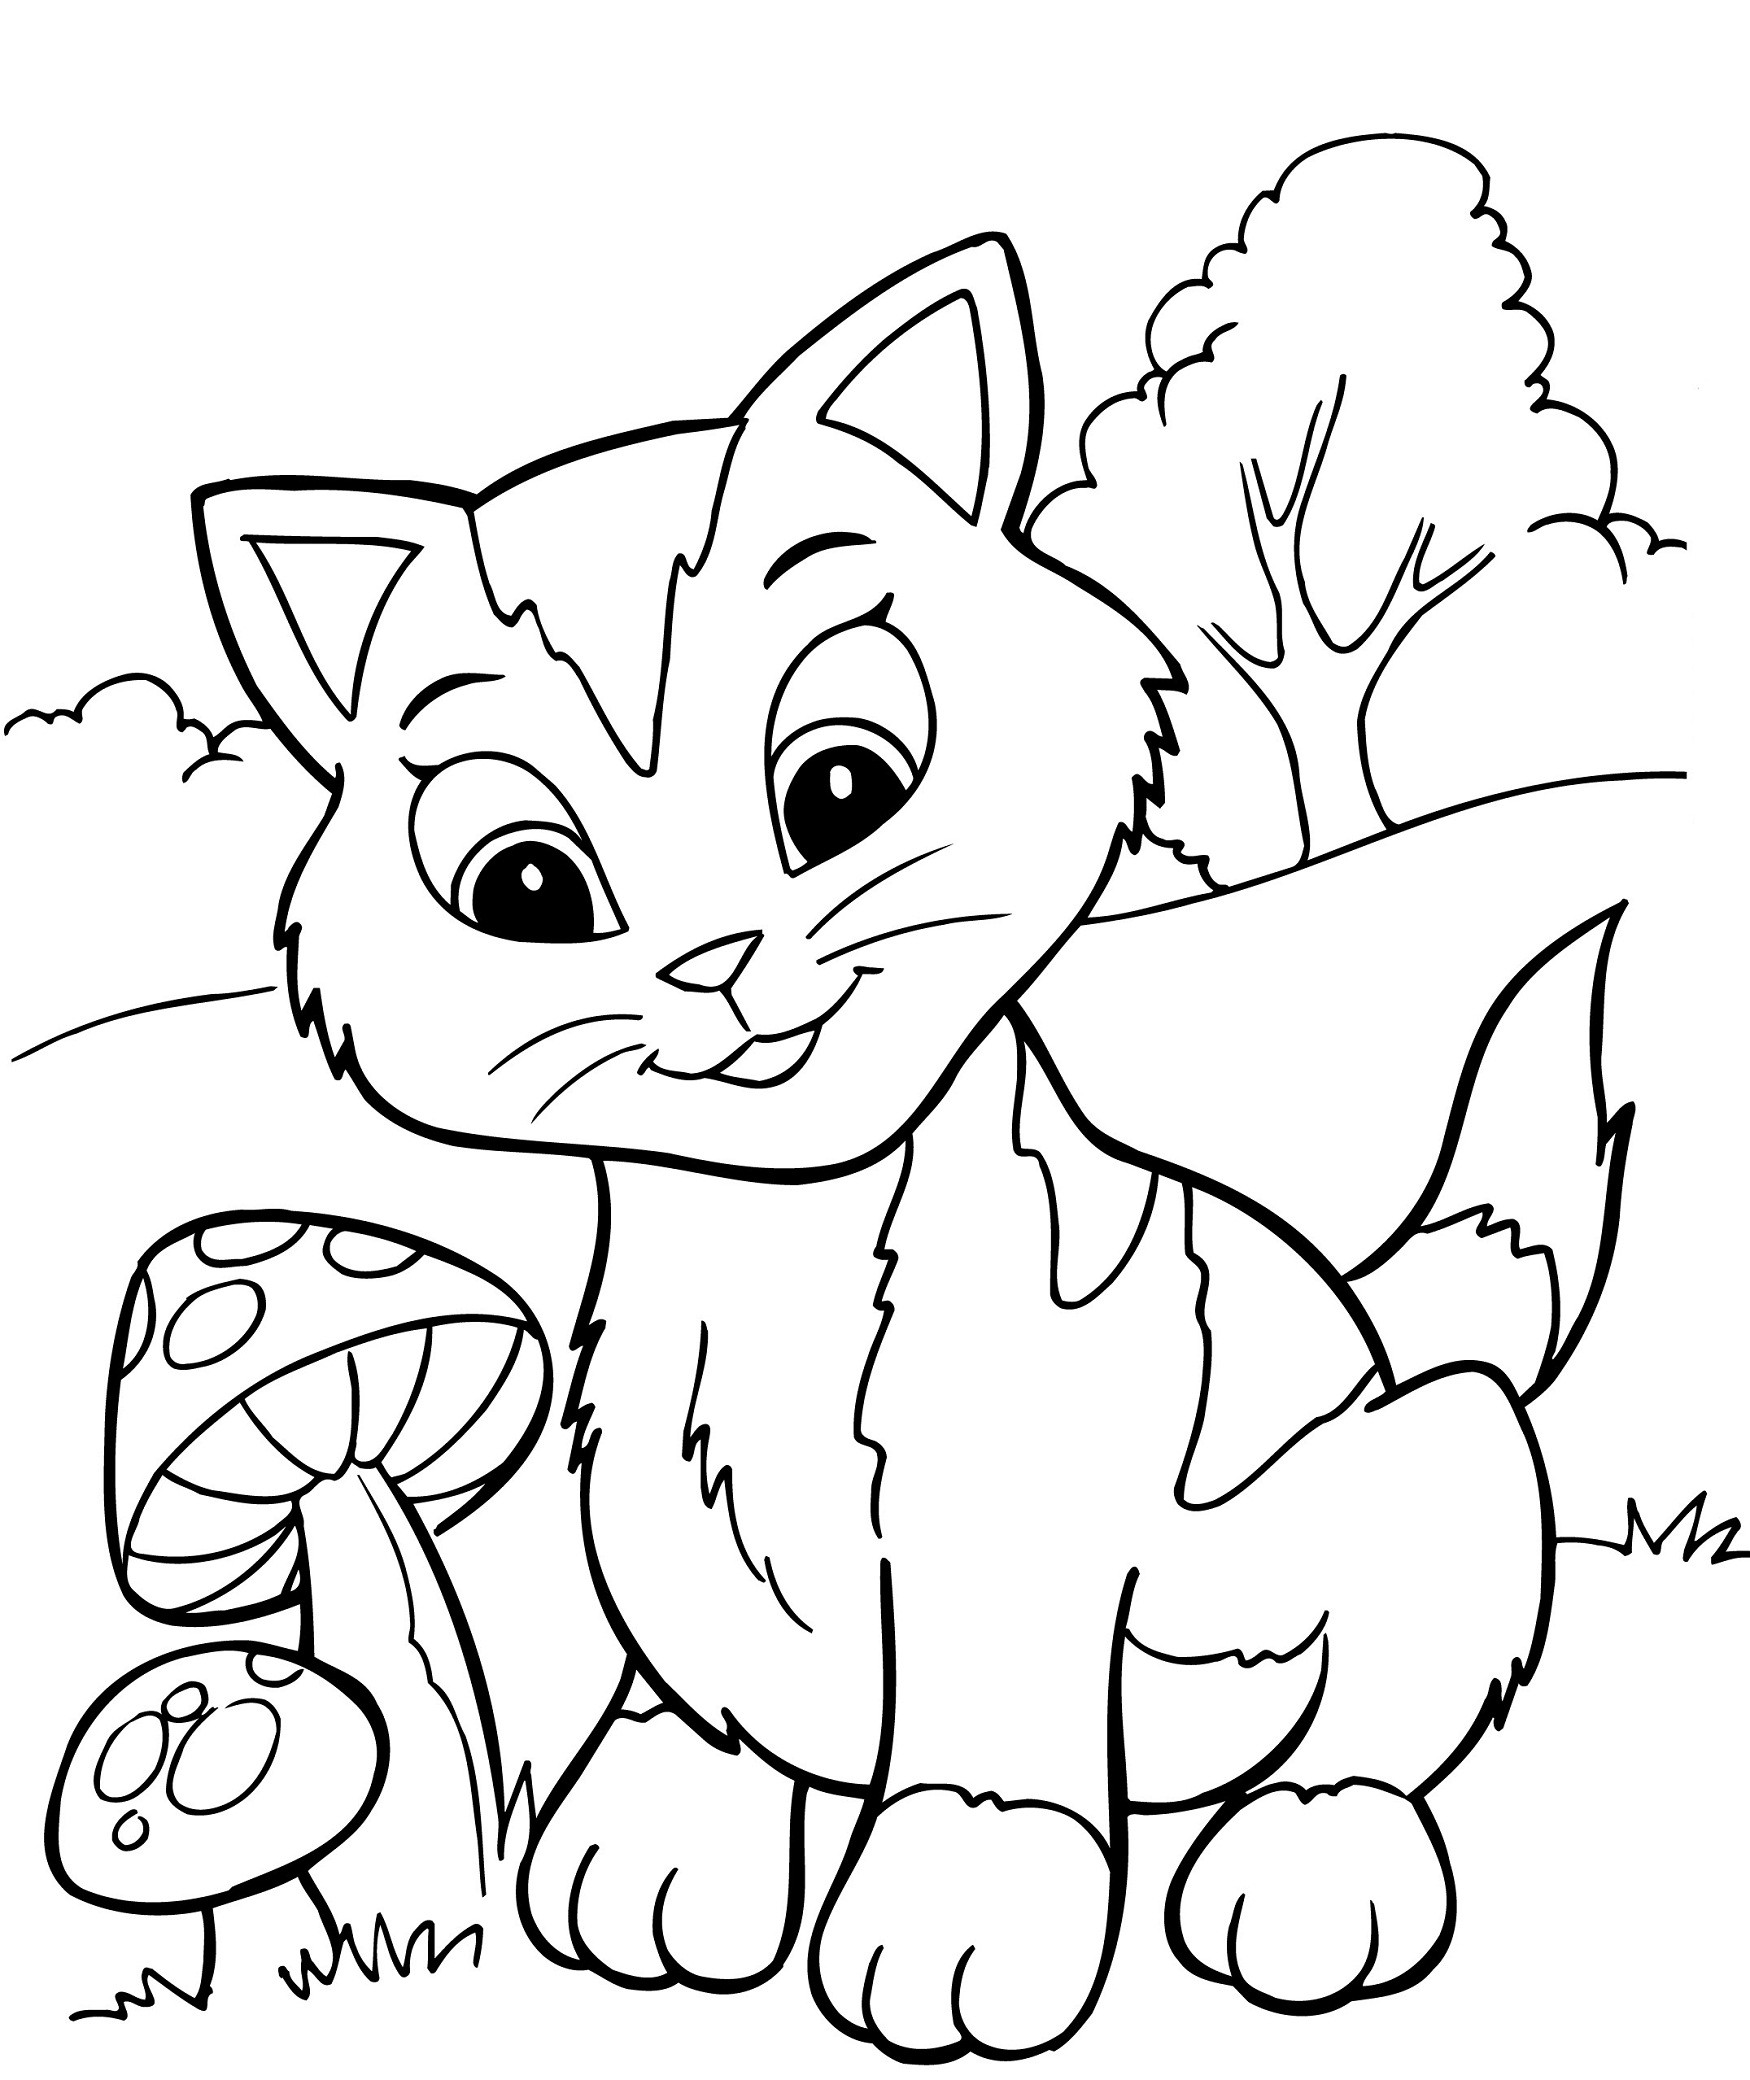 Kids Coloring Pages Pdf
 Printable Coloring Book Pages for Kids Gallery